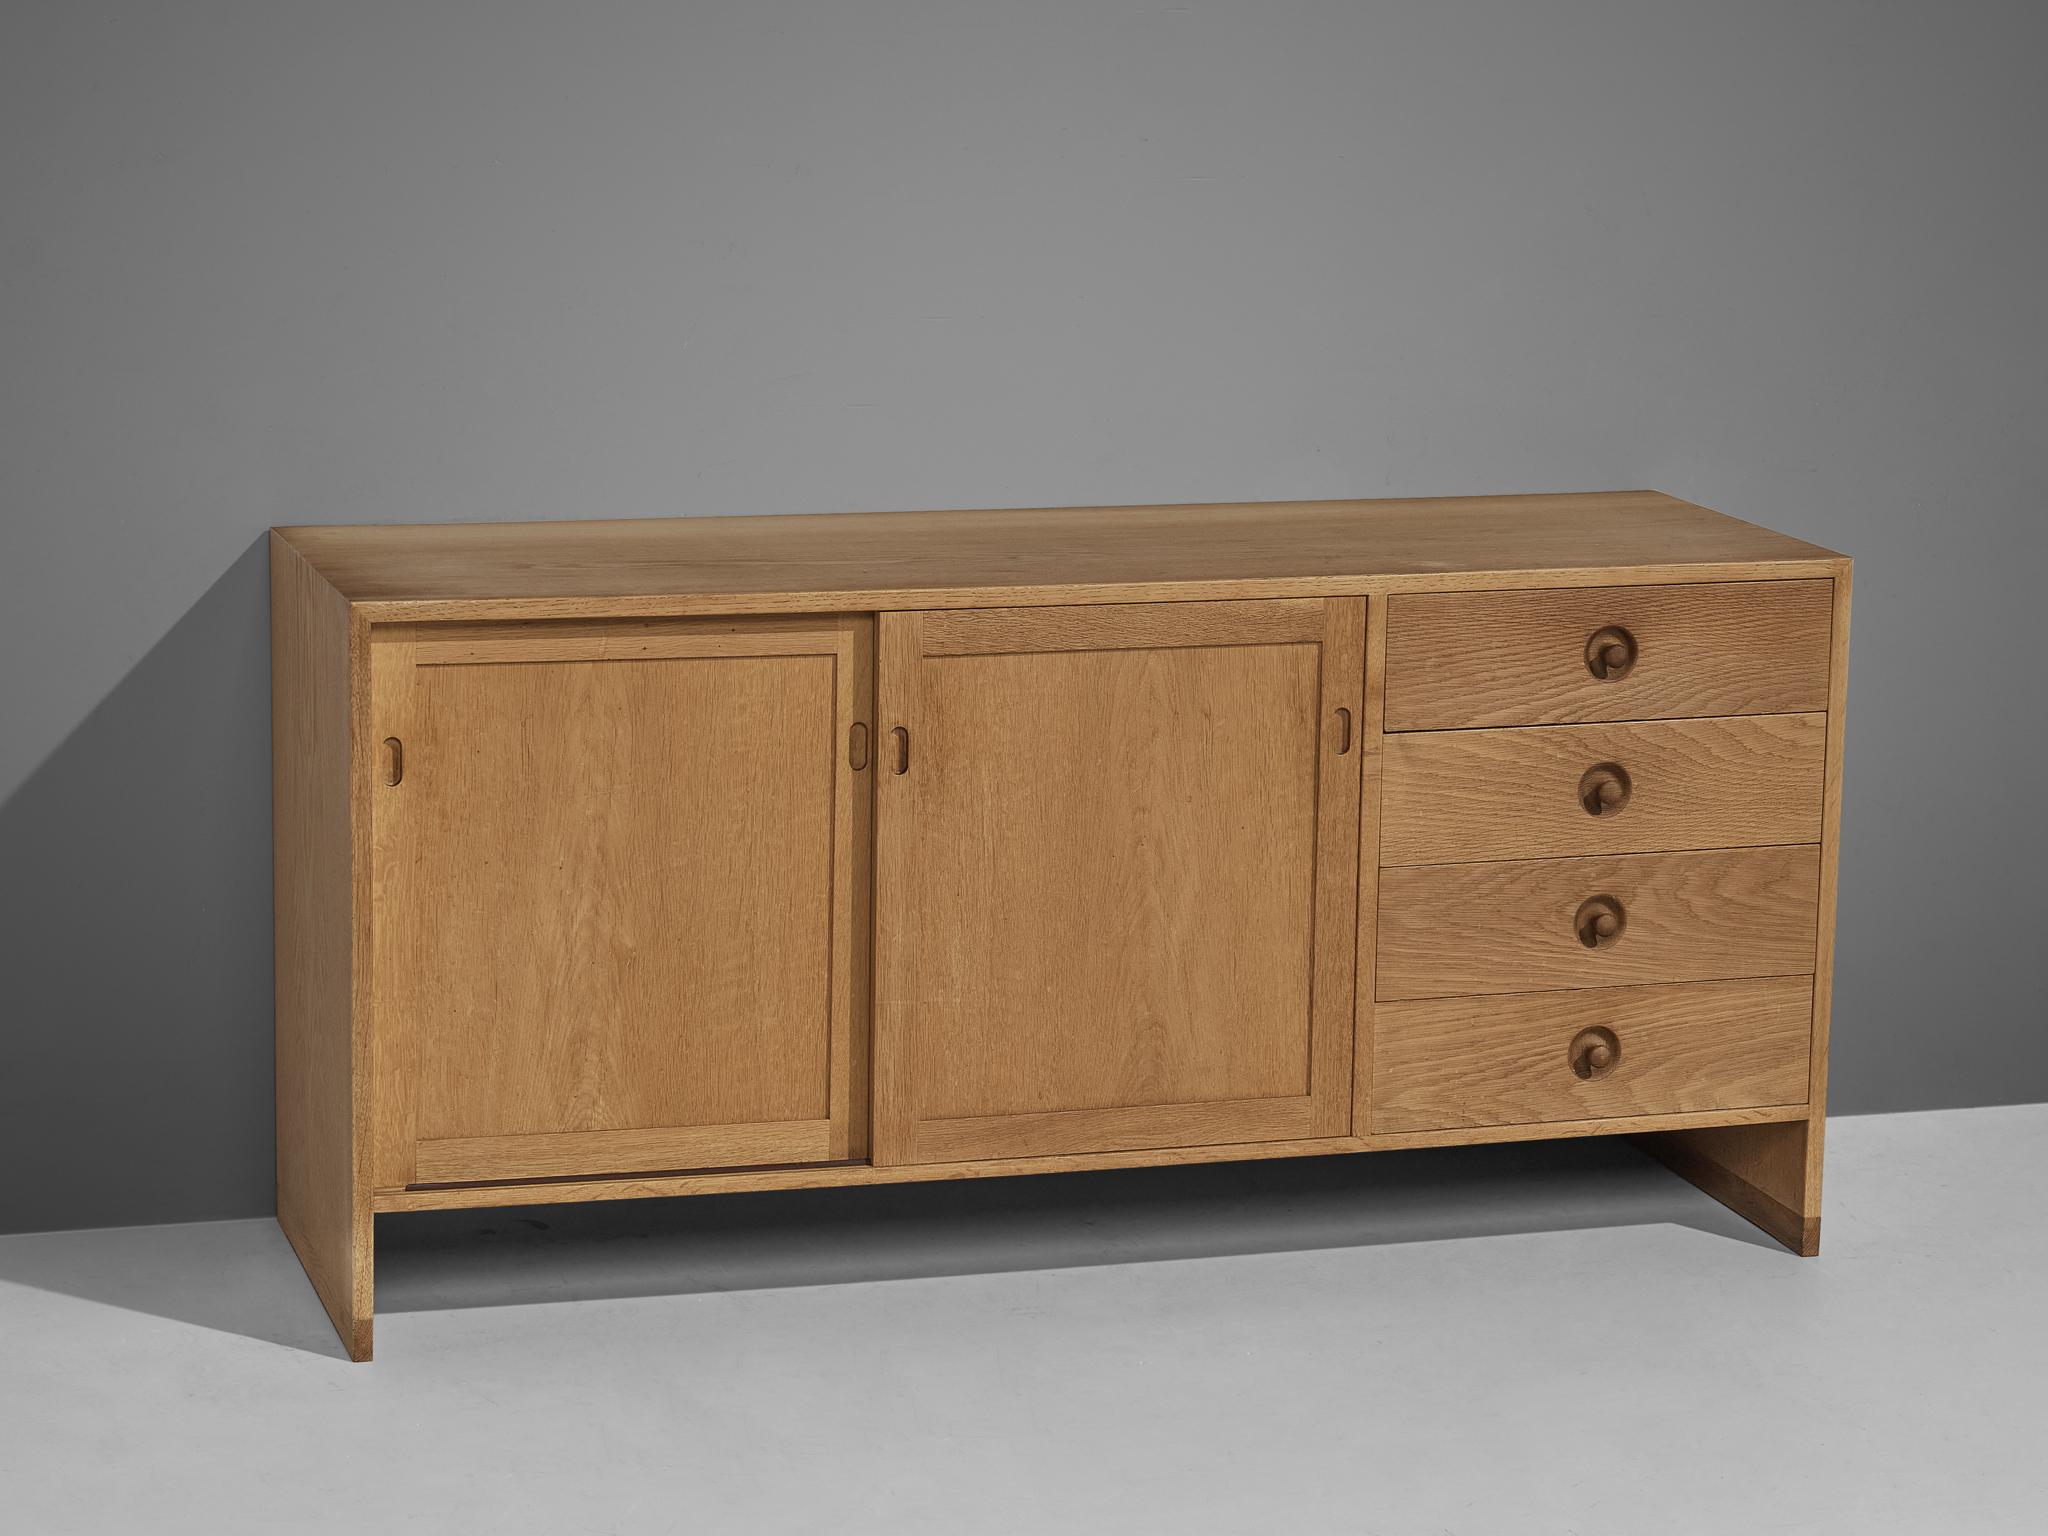 Hans Wegner for Ry Møbler, cabinet, oak, Denmark, 1960s.

This cabinet is executed in oak and is typical for midcentury Scandinavian design. It contains two sliding doors which reveals two inner compartments with shelves. On the right side, four